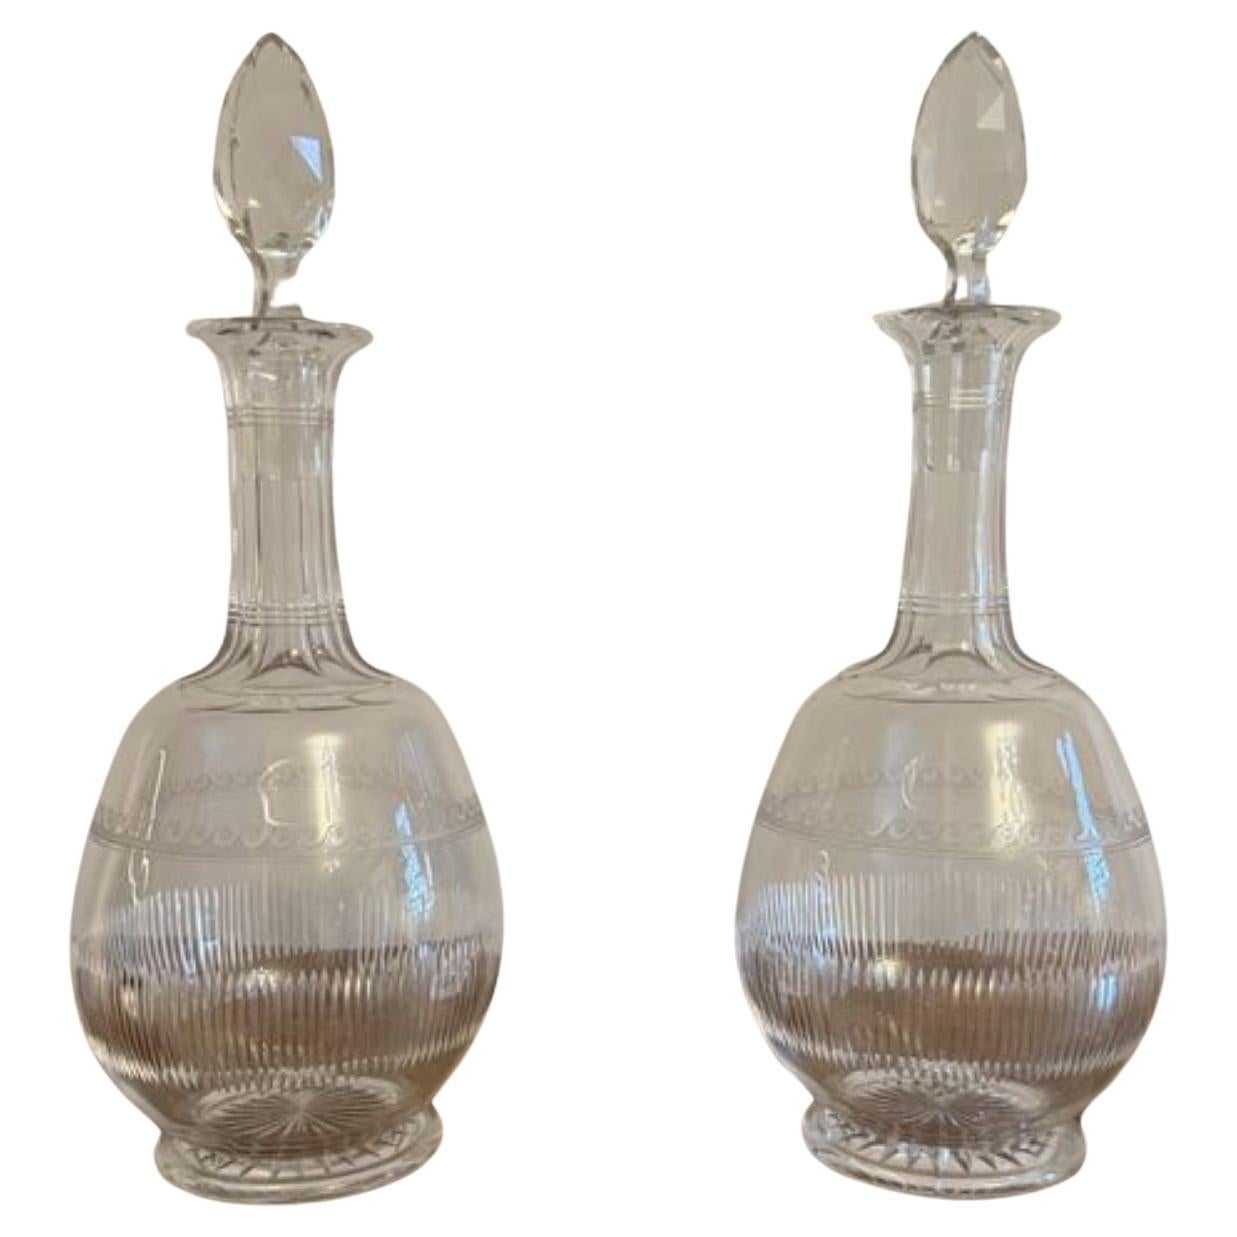 Stunning pair of antique Victorian decanters 